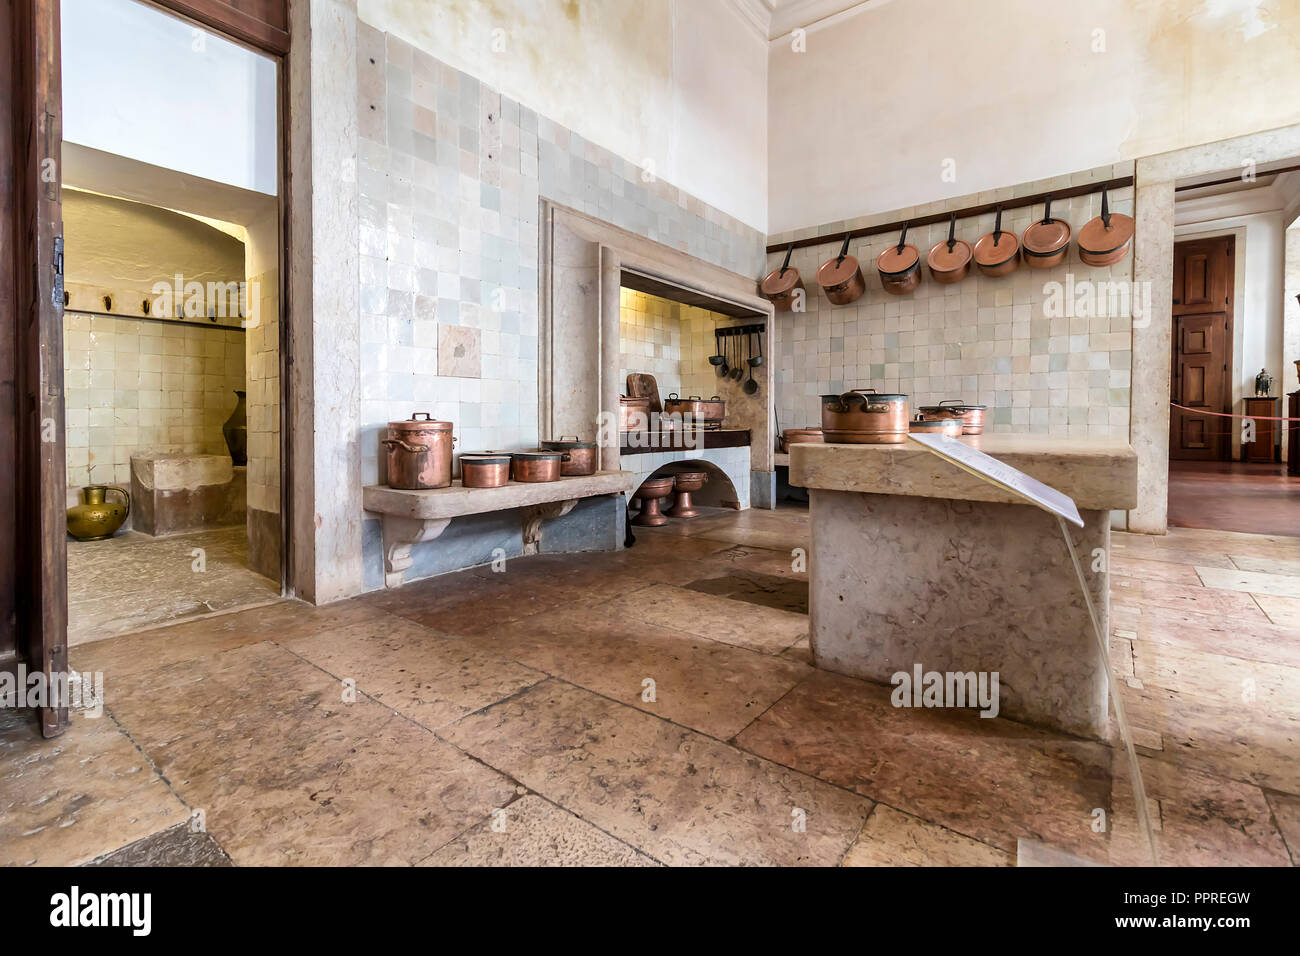 Mafra, Portugal - December 10, 2017:  Antique kitchen inside Mafra National Palace, Convent and Basilica. Franciscan Religious Order. Baroque. Stock Photo